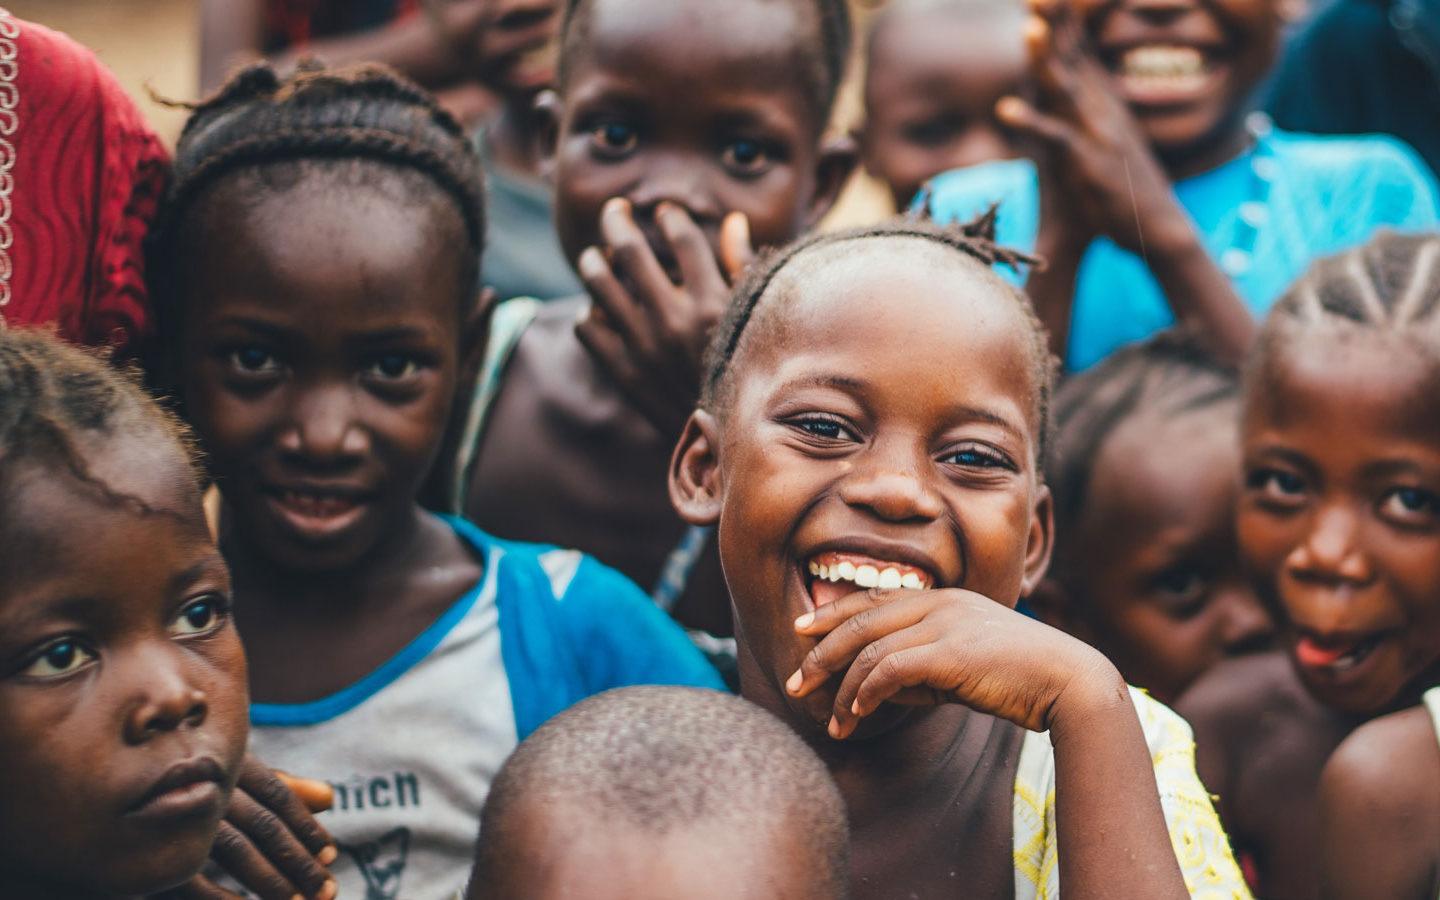 a group of smiling children in a developing country